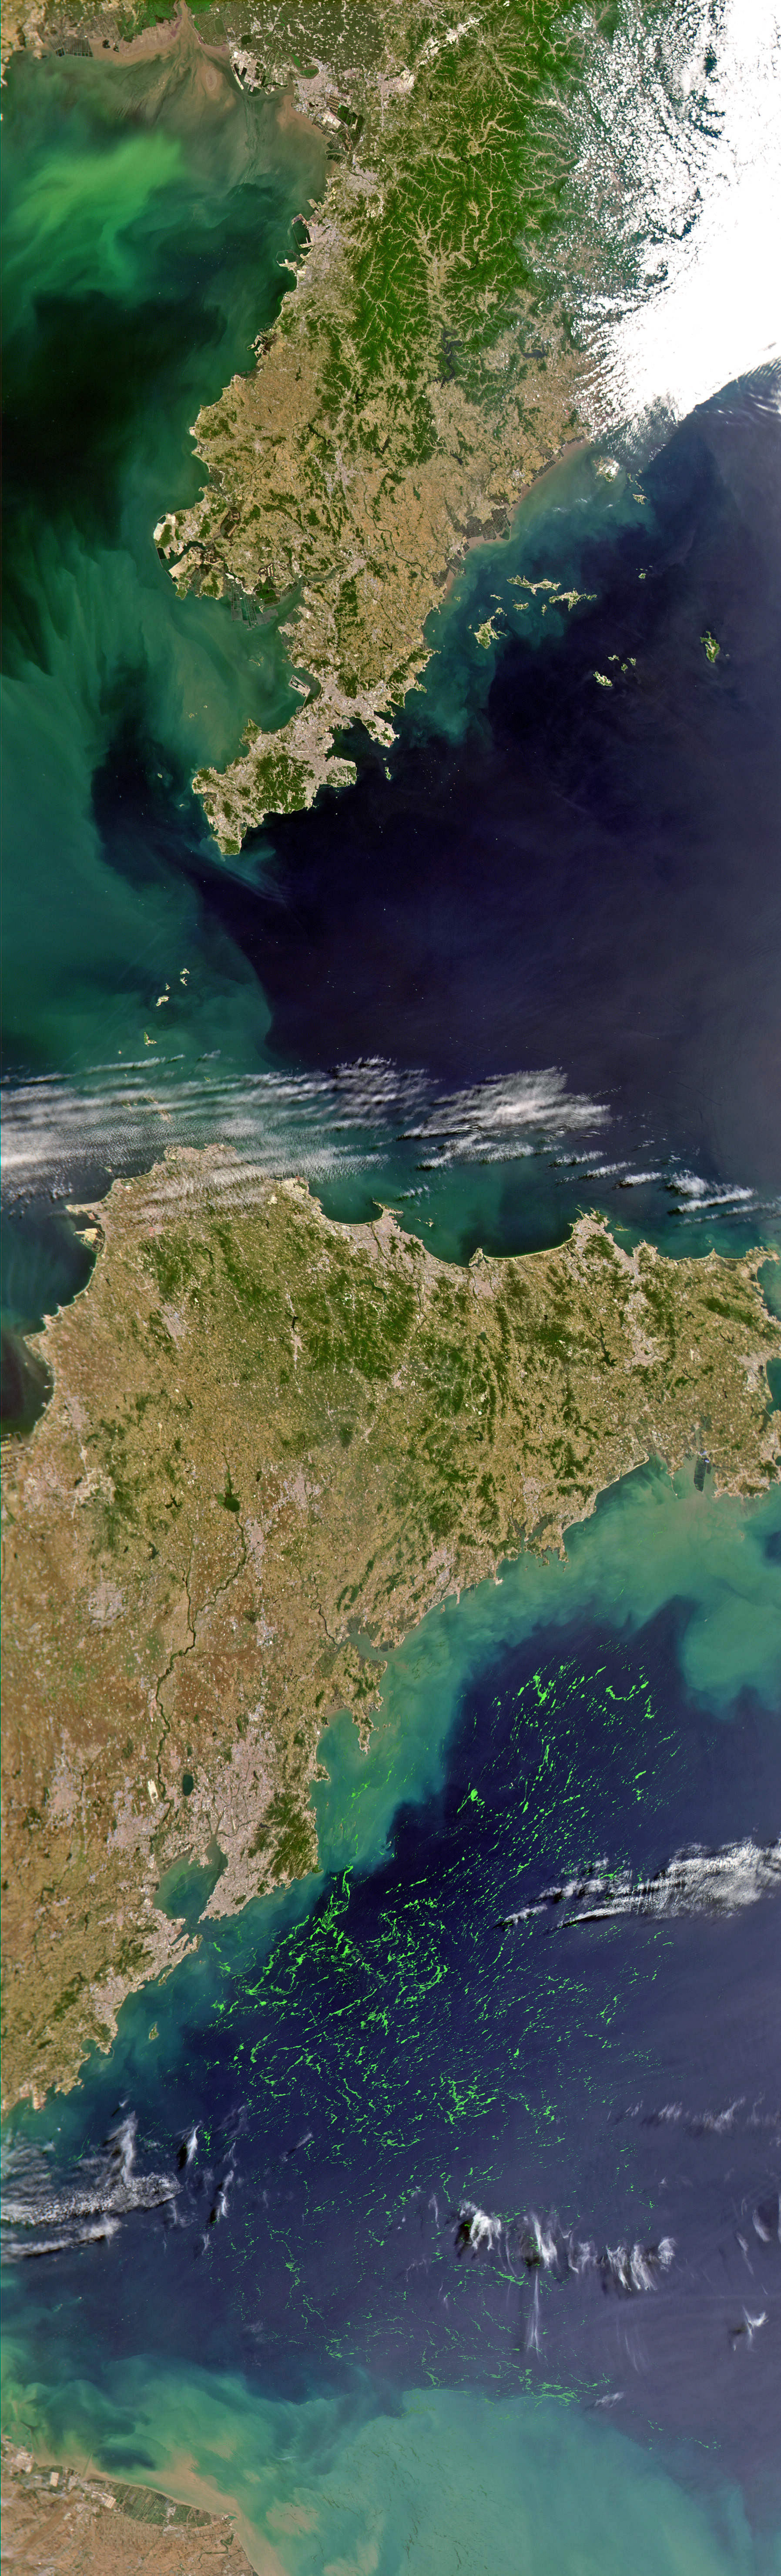 Green Seaweed in the Yellow Sea - related image preview